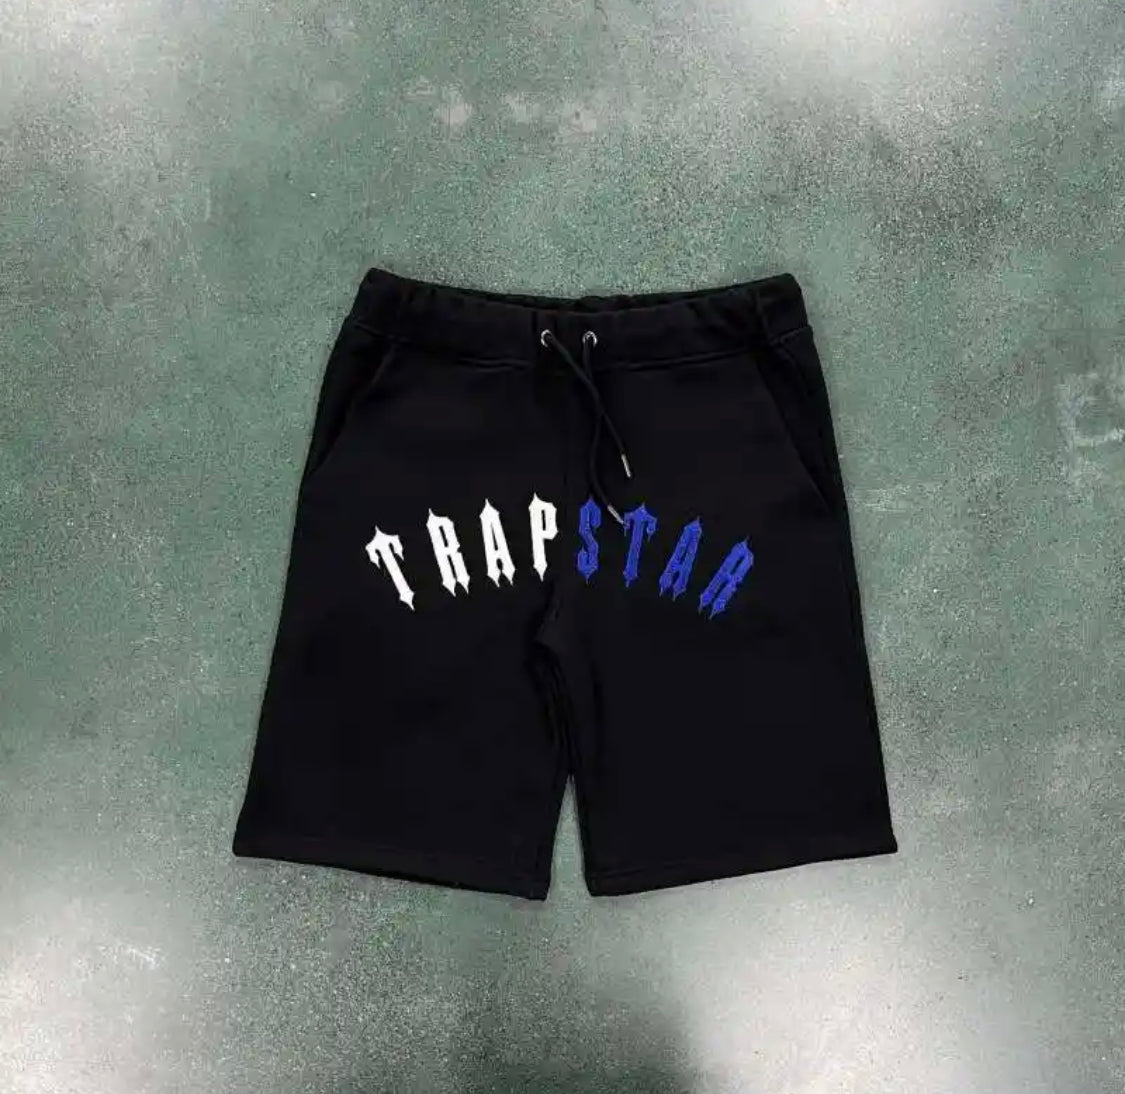 Arch Chenile shorts and tee - Black/Blue